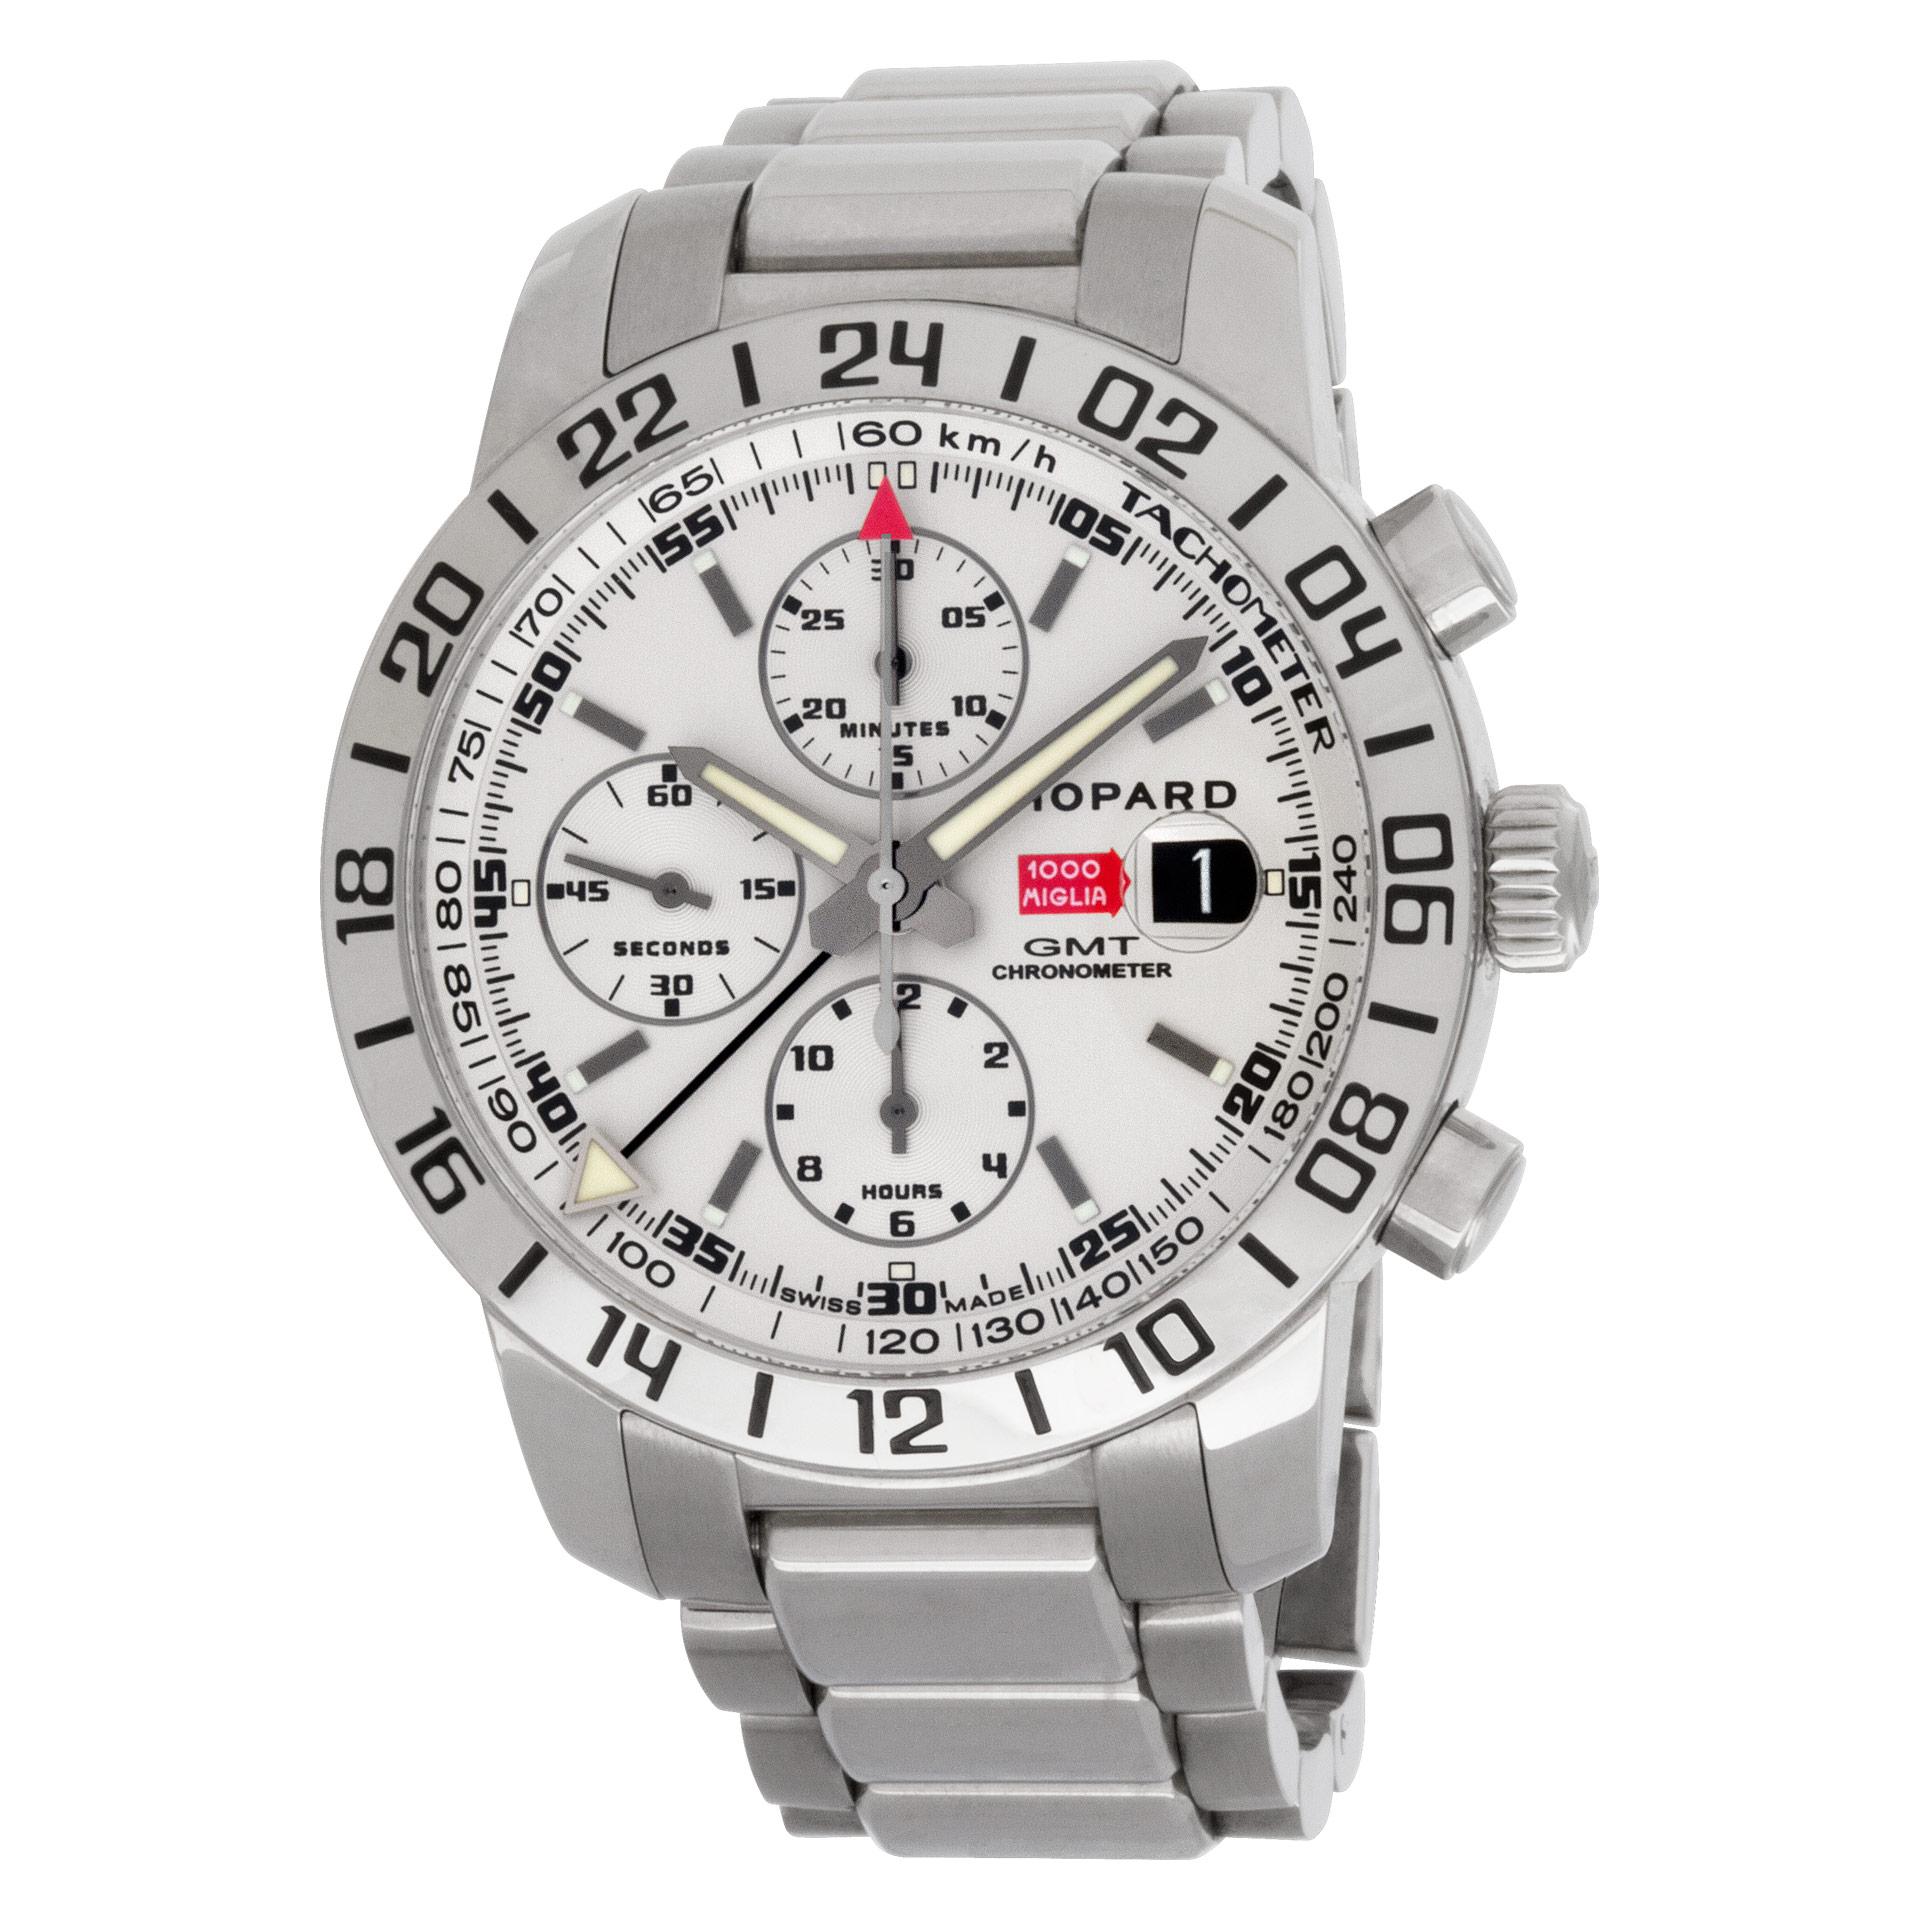 Chopard Mille Miglia GMT Chronograph in stainless steel. Auto w/ subseconds, date, chronograph and dual time. 42 mm case size. With box. Ref 8992. Circa 2010s. Fine Pre-owned Chopard Watch. Certified preowned Sport Chopard Mille Miglia 8992 watch is